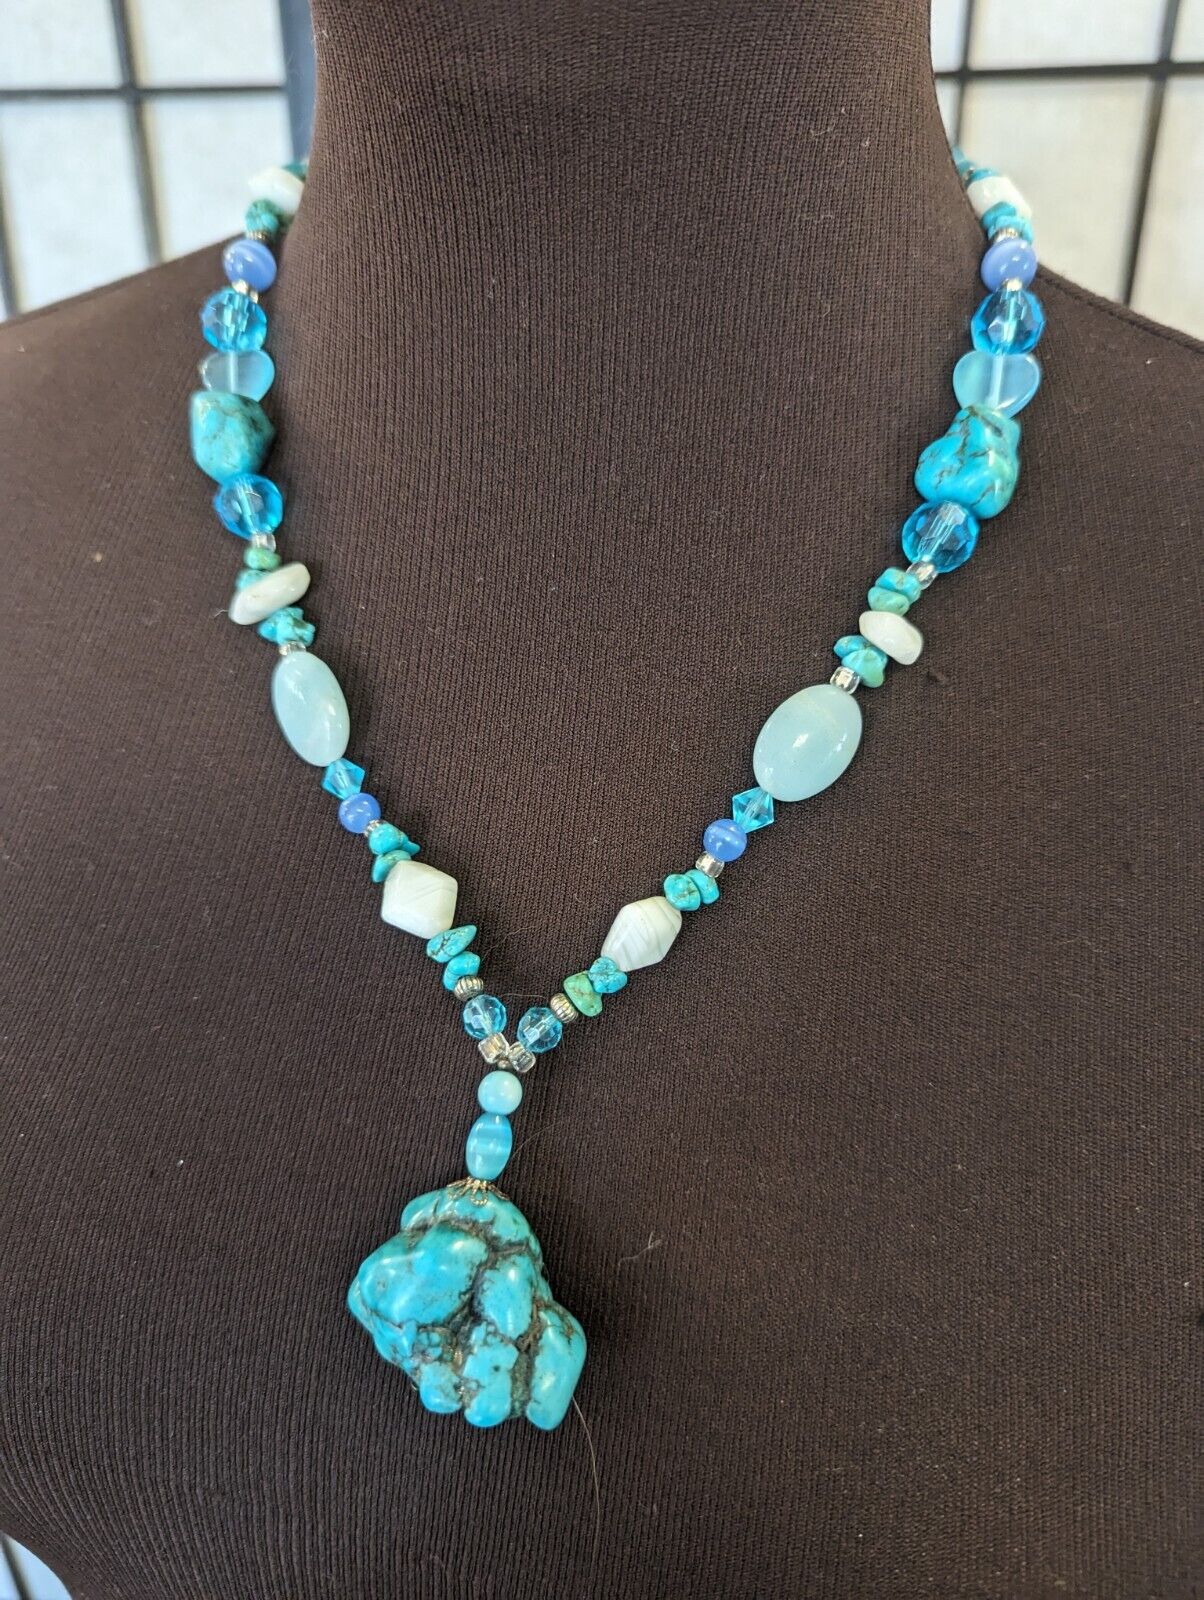 Vintage Artisan TURQUOISE howlite stone Beaded Necklace 20in boho gypsy Magical